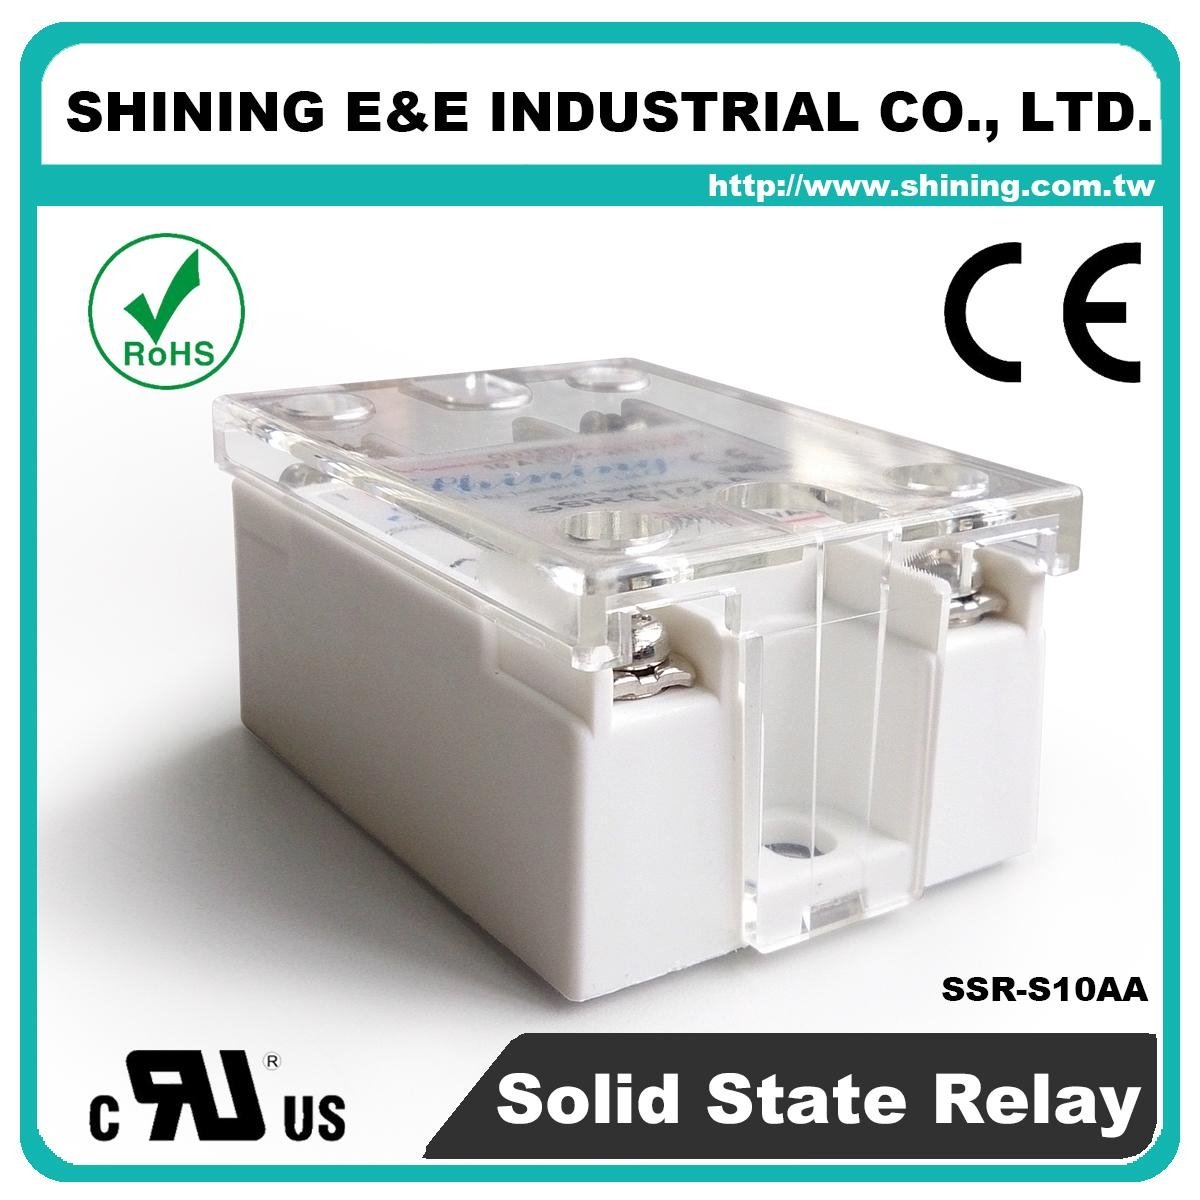 SSR-S10AA Single Phase 10Amp AC to AC Solid State Relays ( SSR ) 2